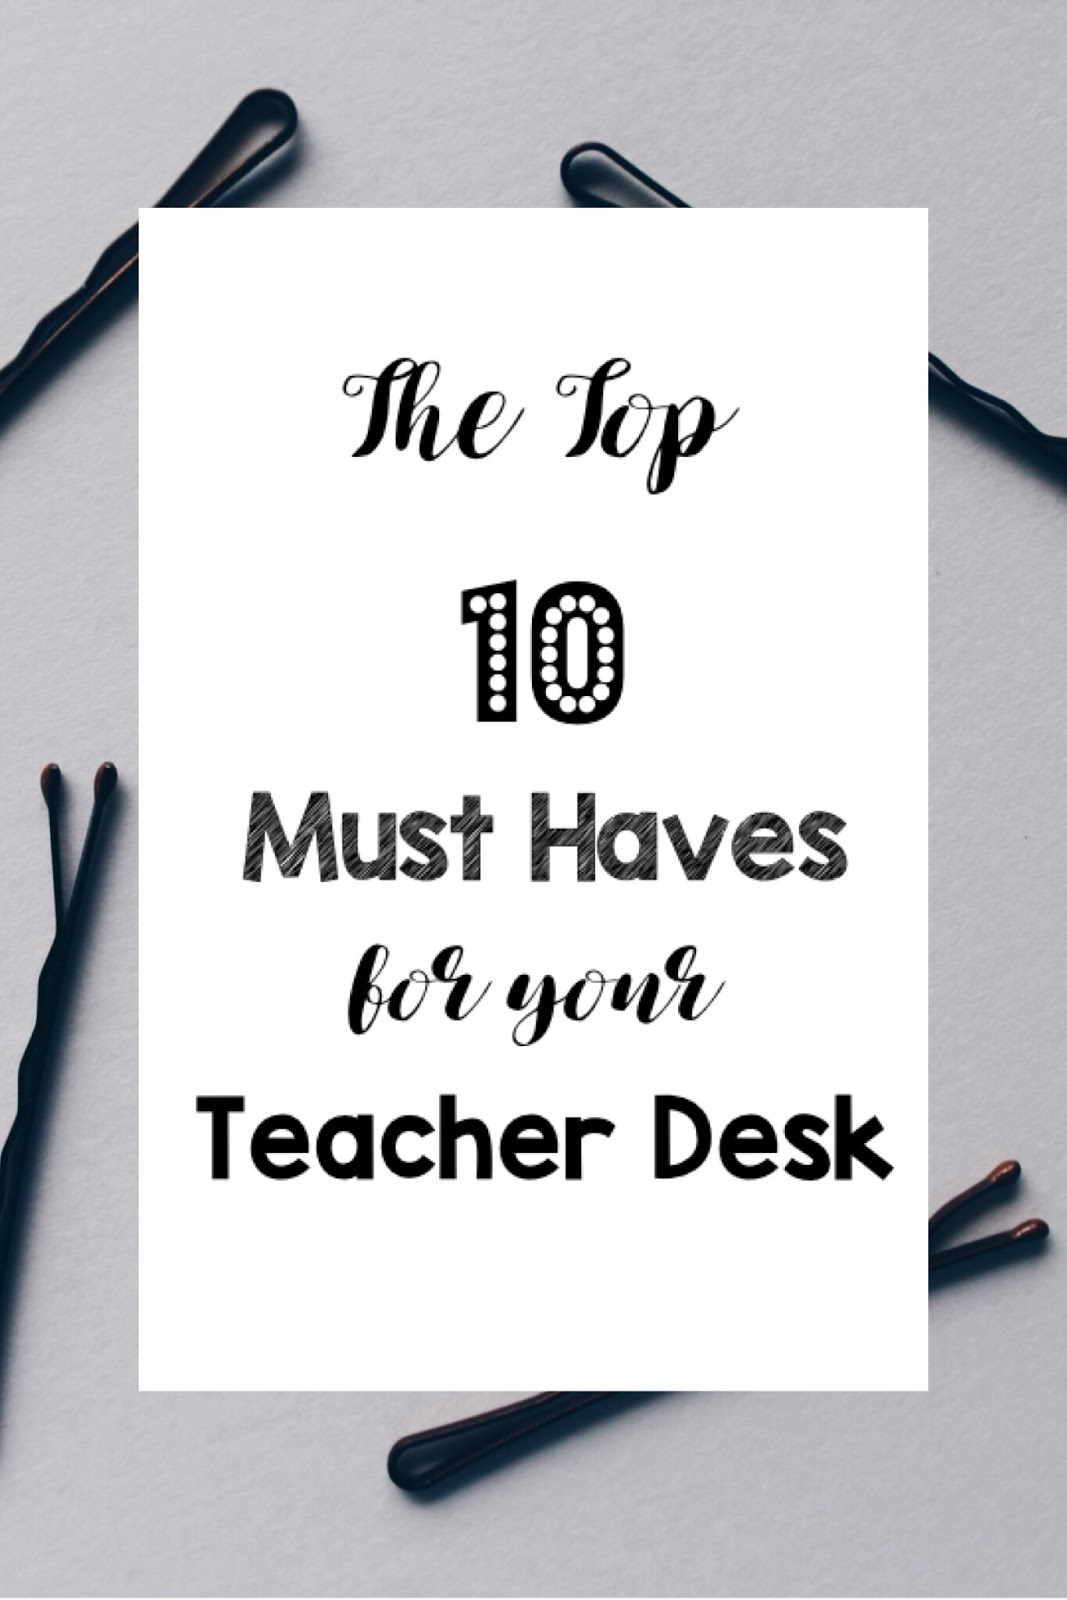 My 10 Must-Haves